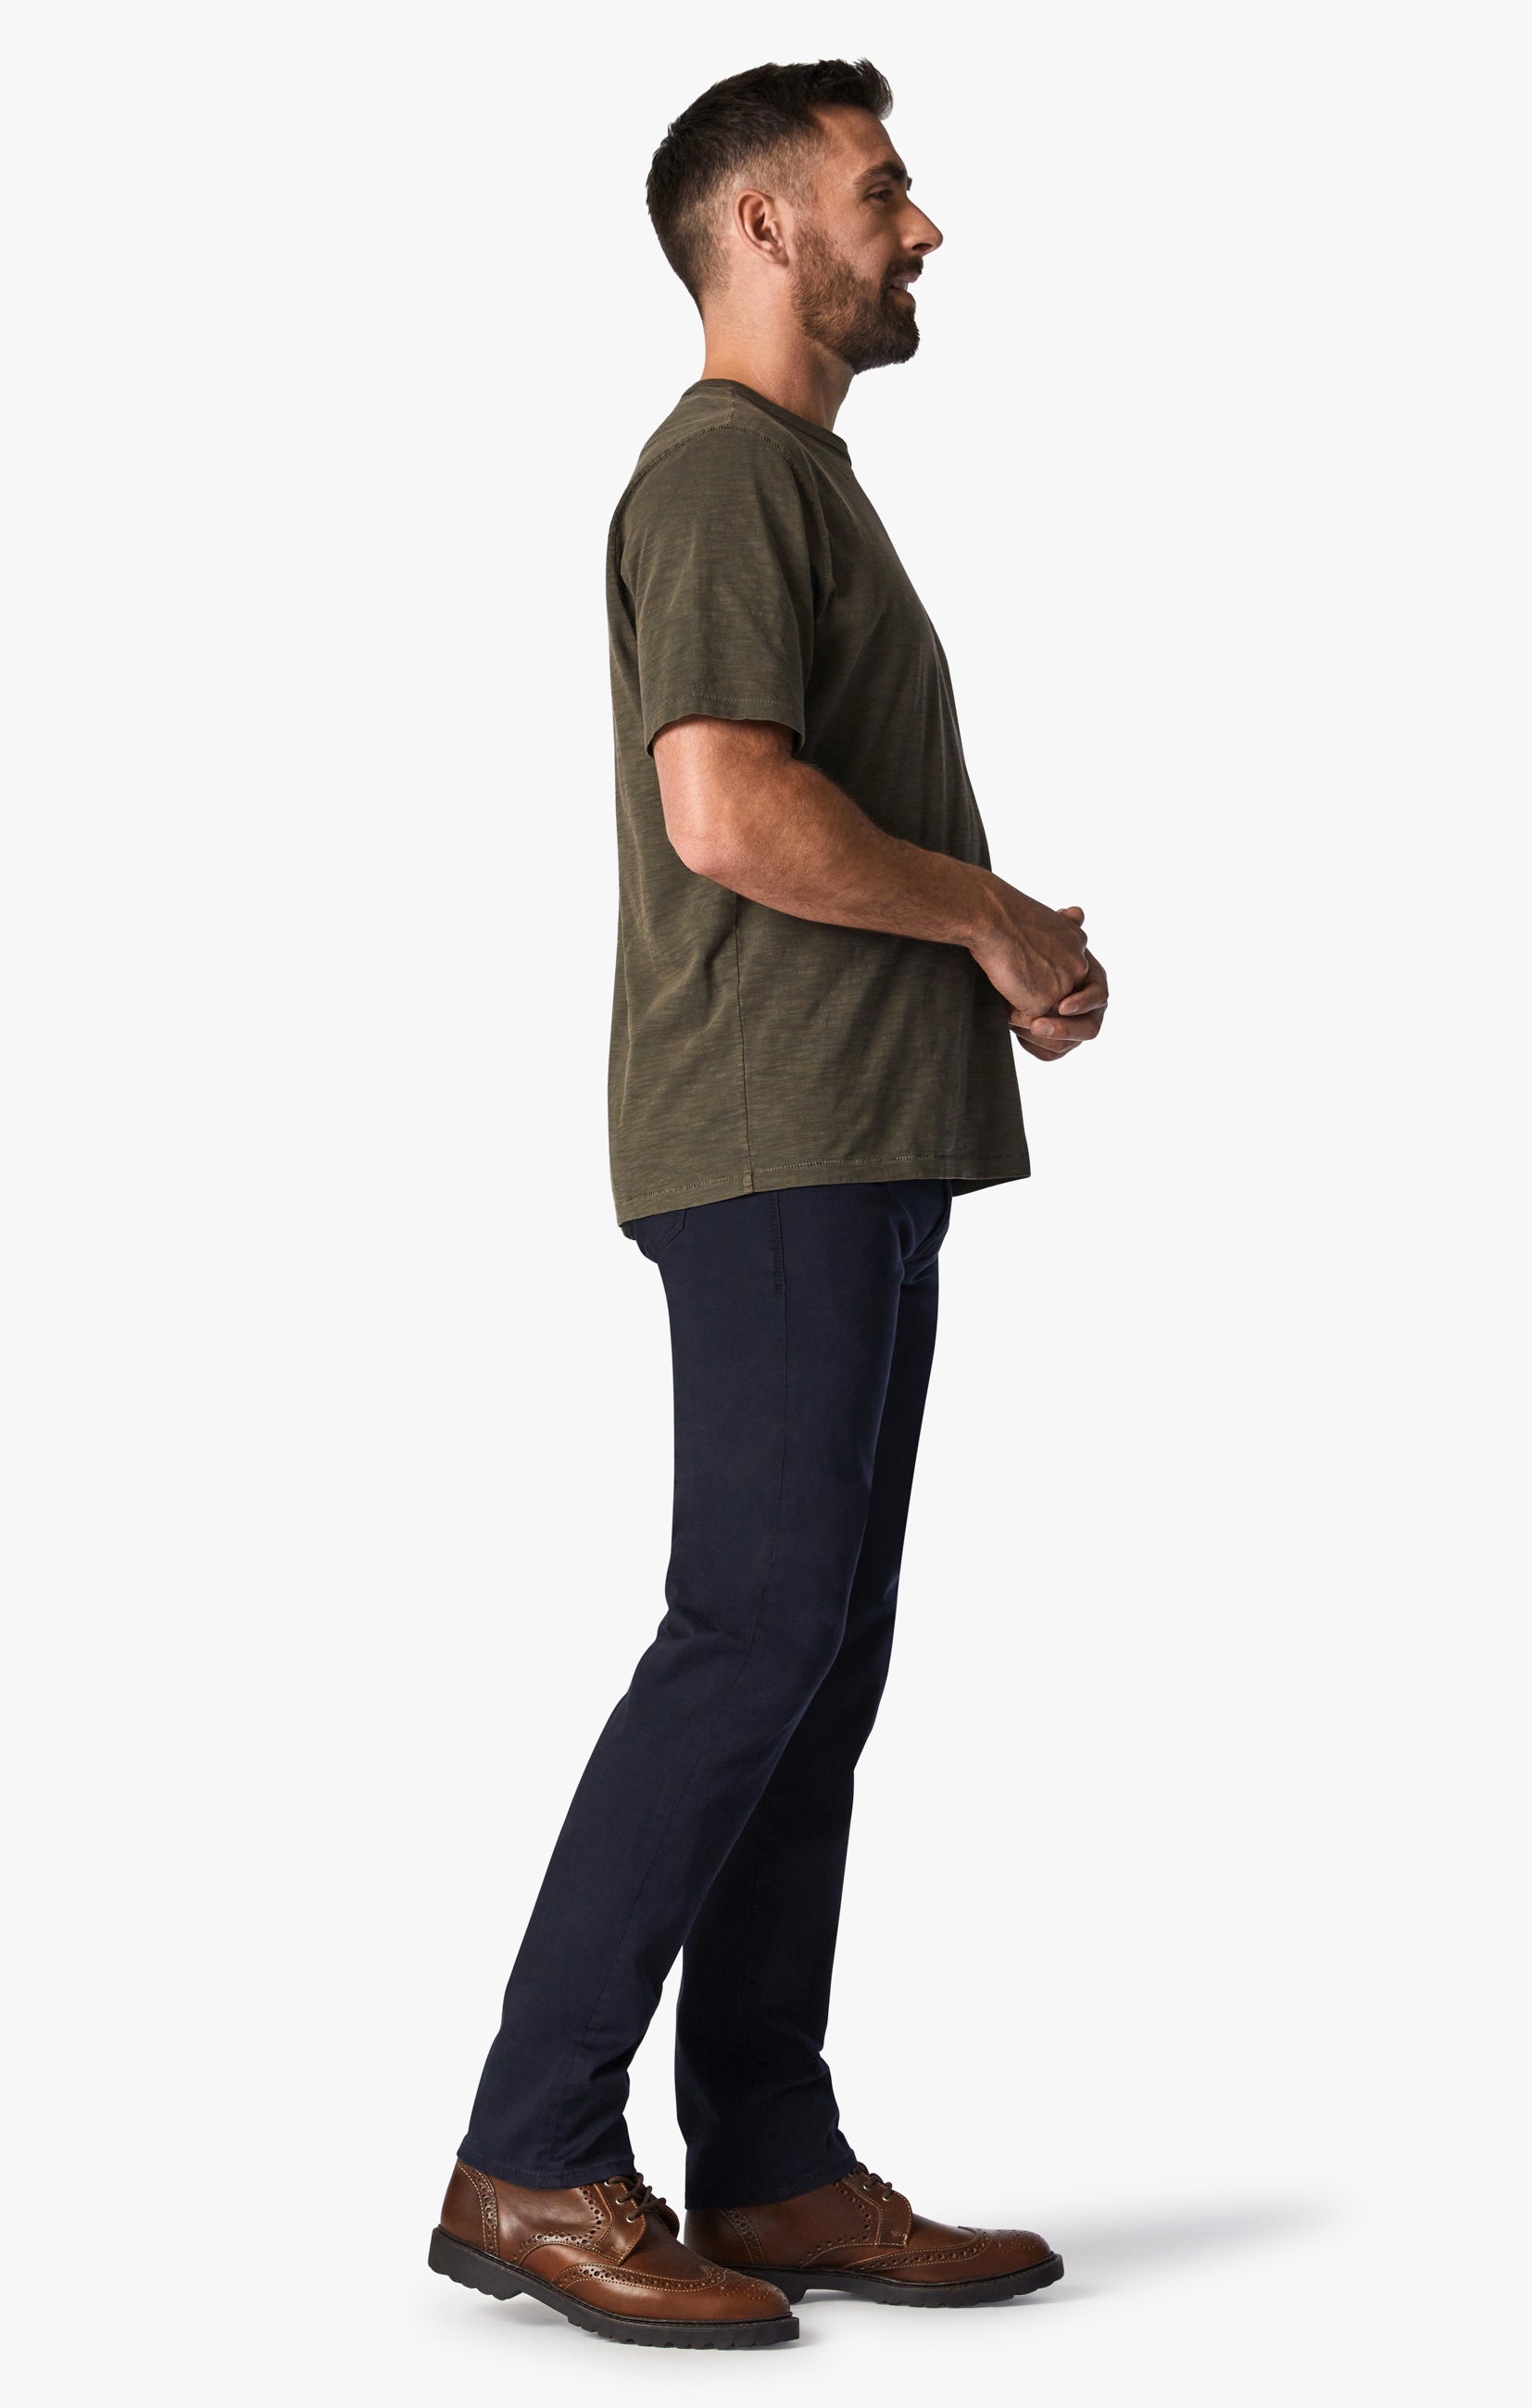 Courage Straight Leg Pants in Navy Twill